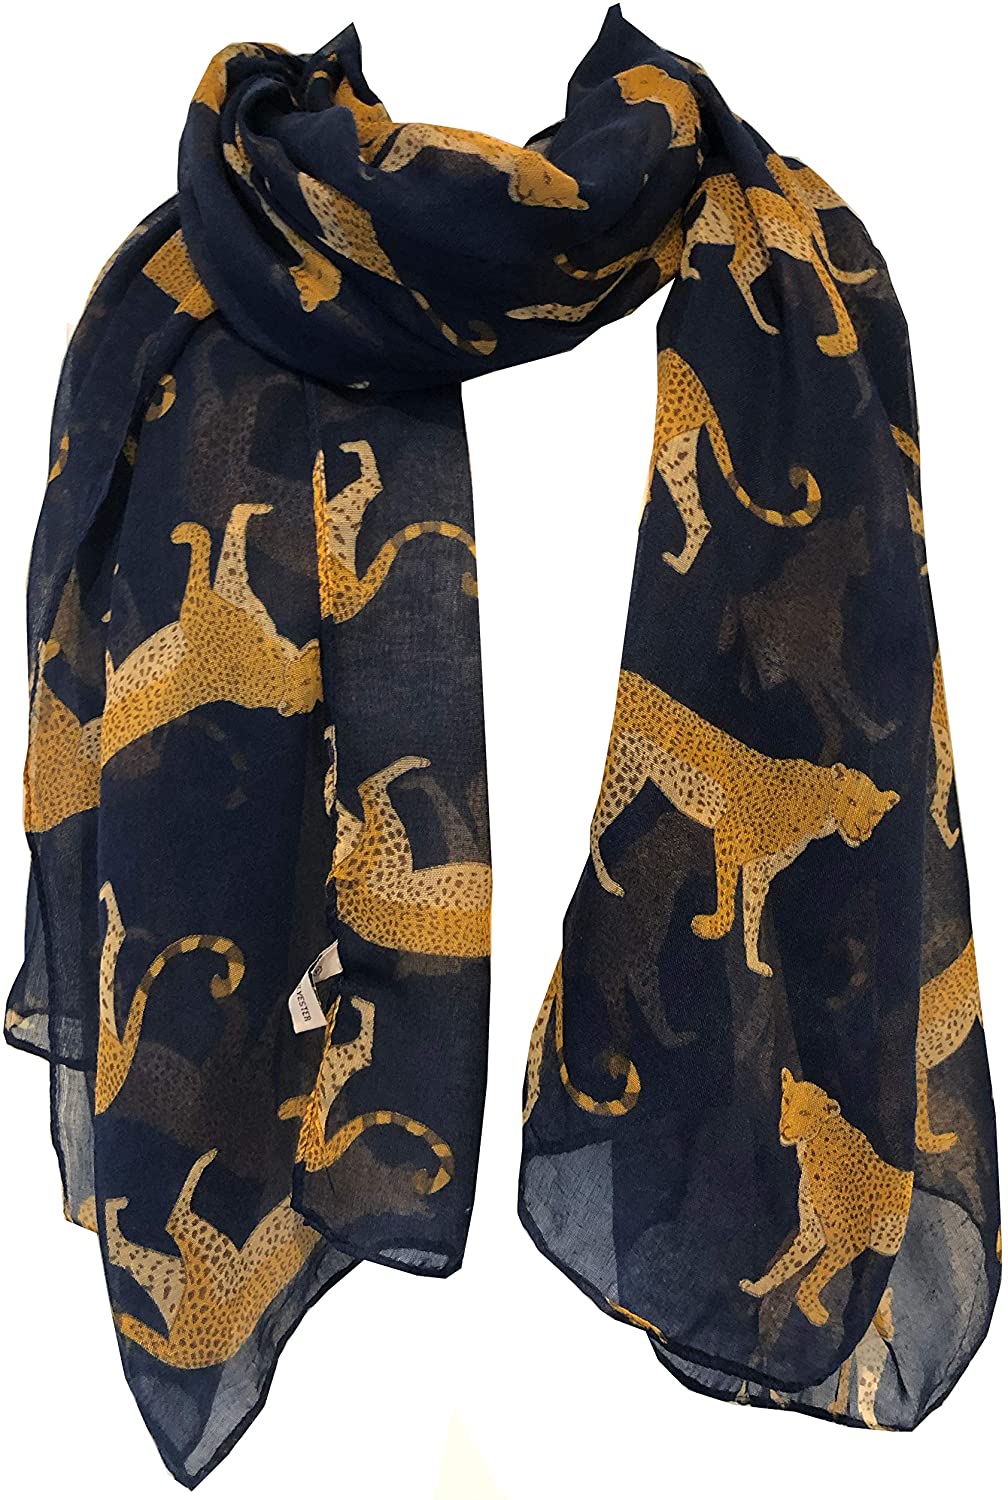 Navy cheetah long soft ladies scarf/wrap. Great present for mum, sister, girlfriend or wife.